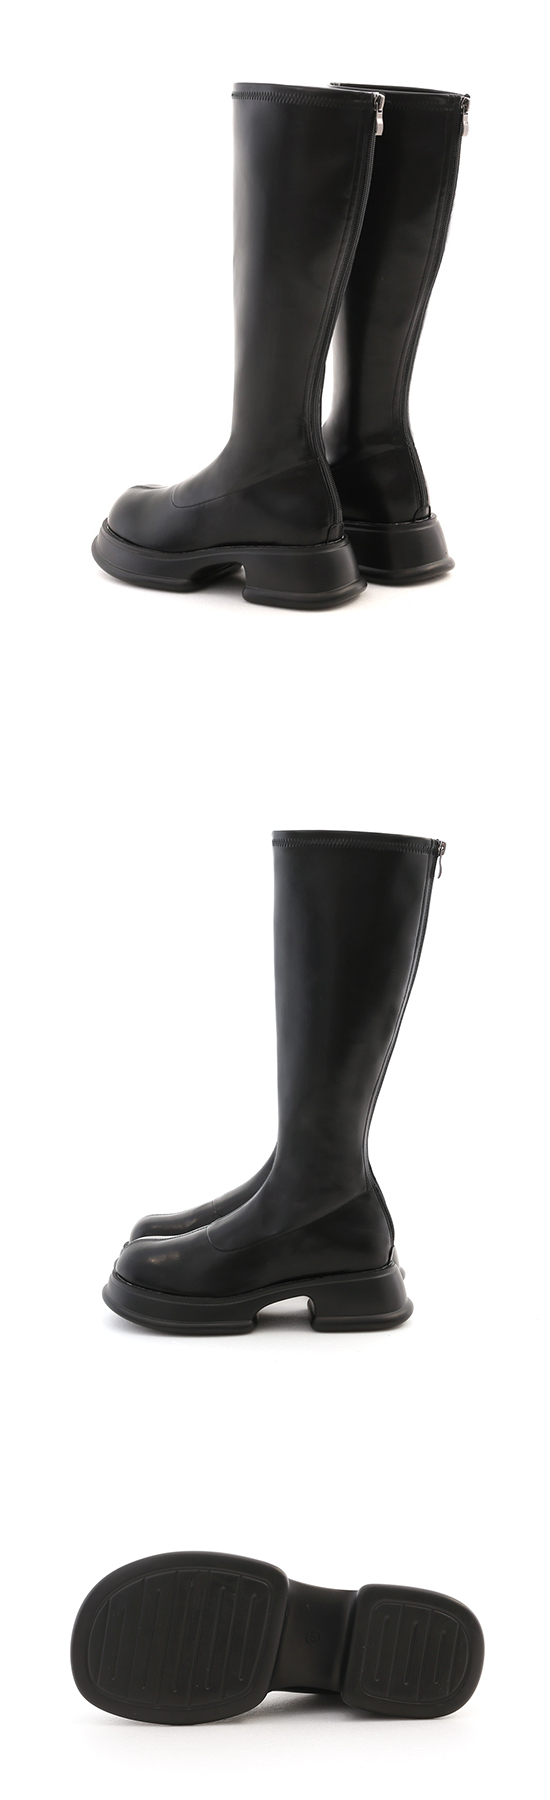 Plain Lightweight Thick Sole Slimming Tall Boots Black